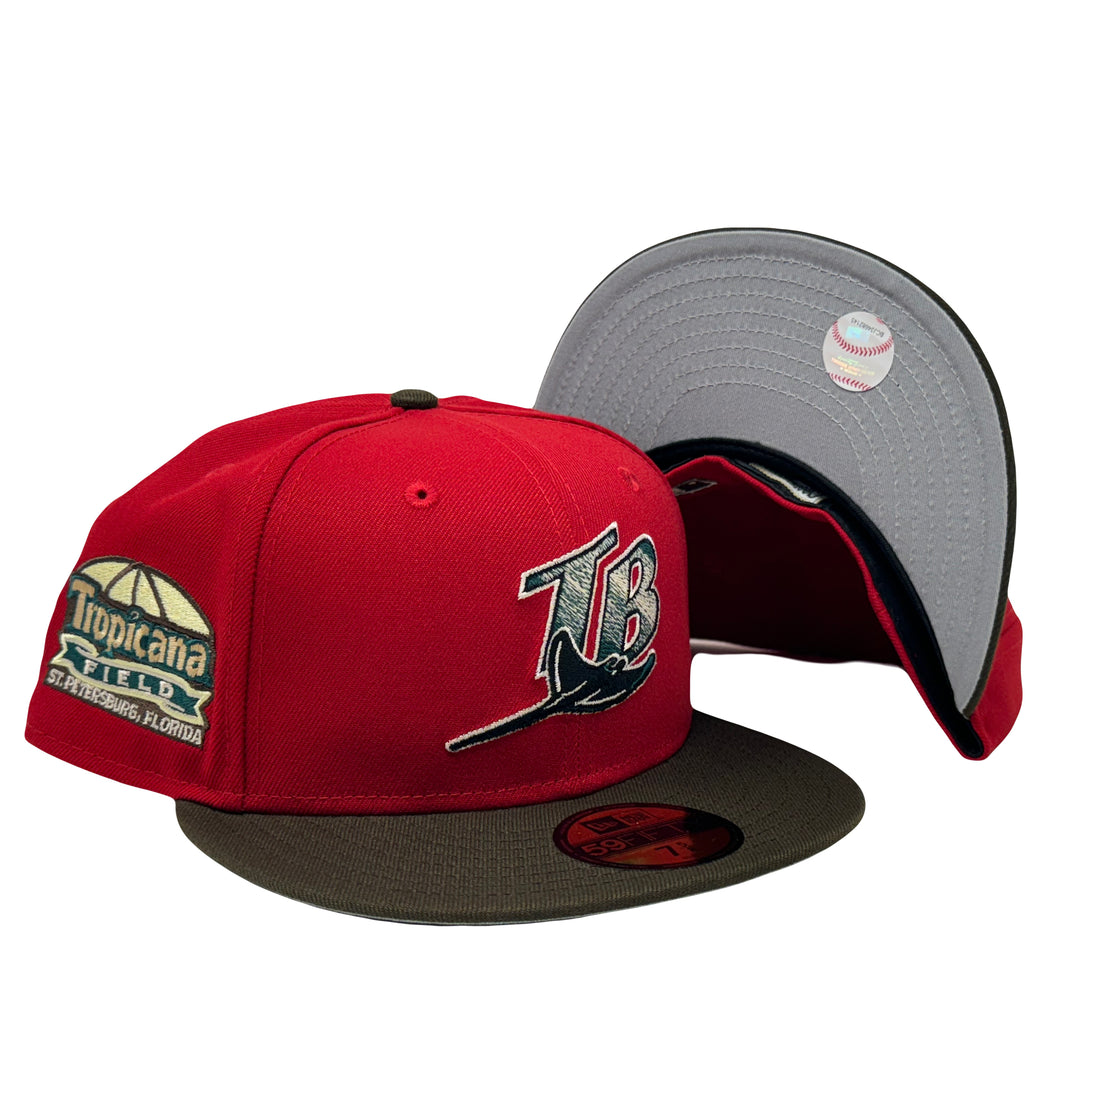 Tampa Bay Devil Rays Tropicana Field Red Brown New Era Fitted Hat